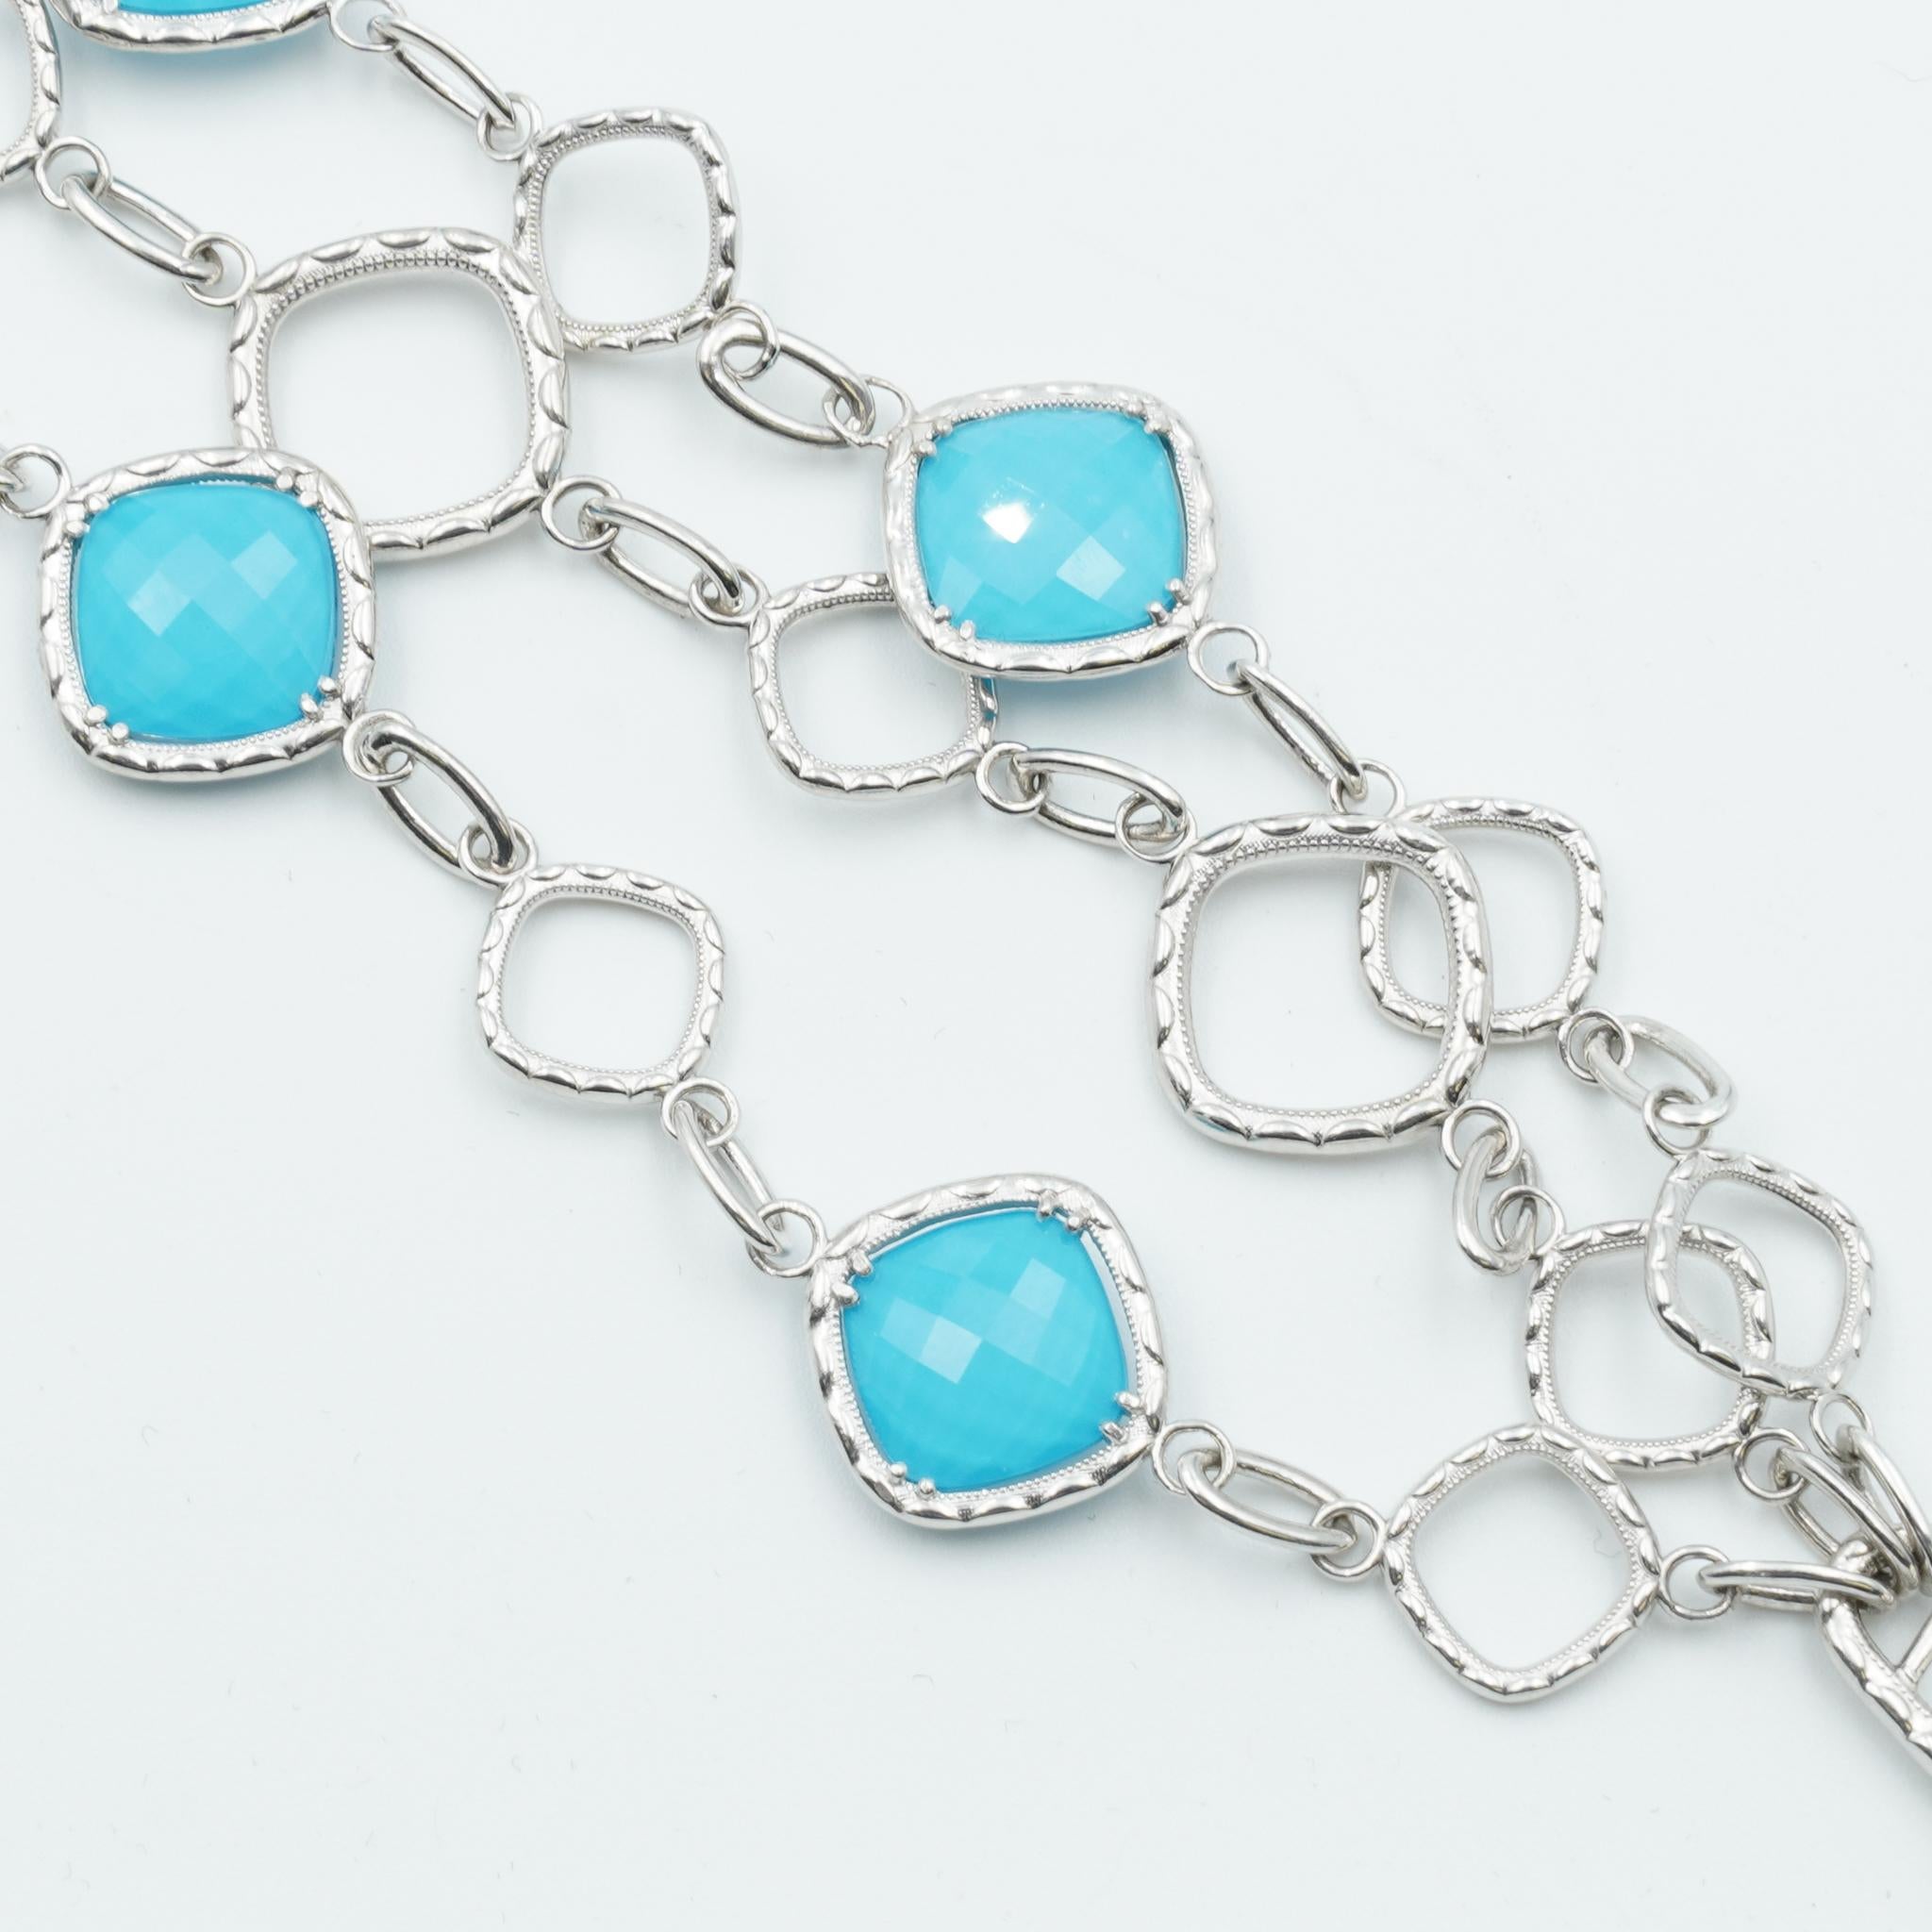 Women's Tacori Faceted Clear Quartz & Neo-Turquoise Gathered Gem Bracelet in Silver